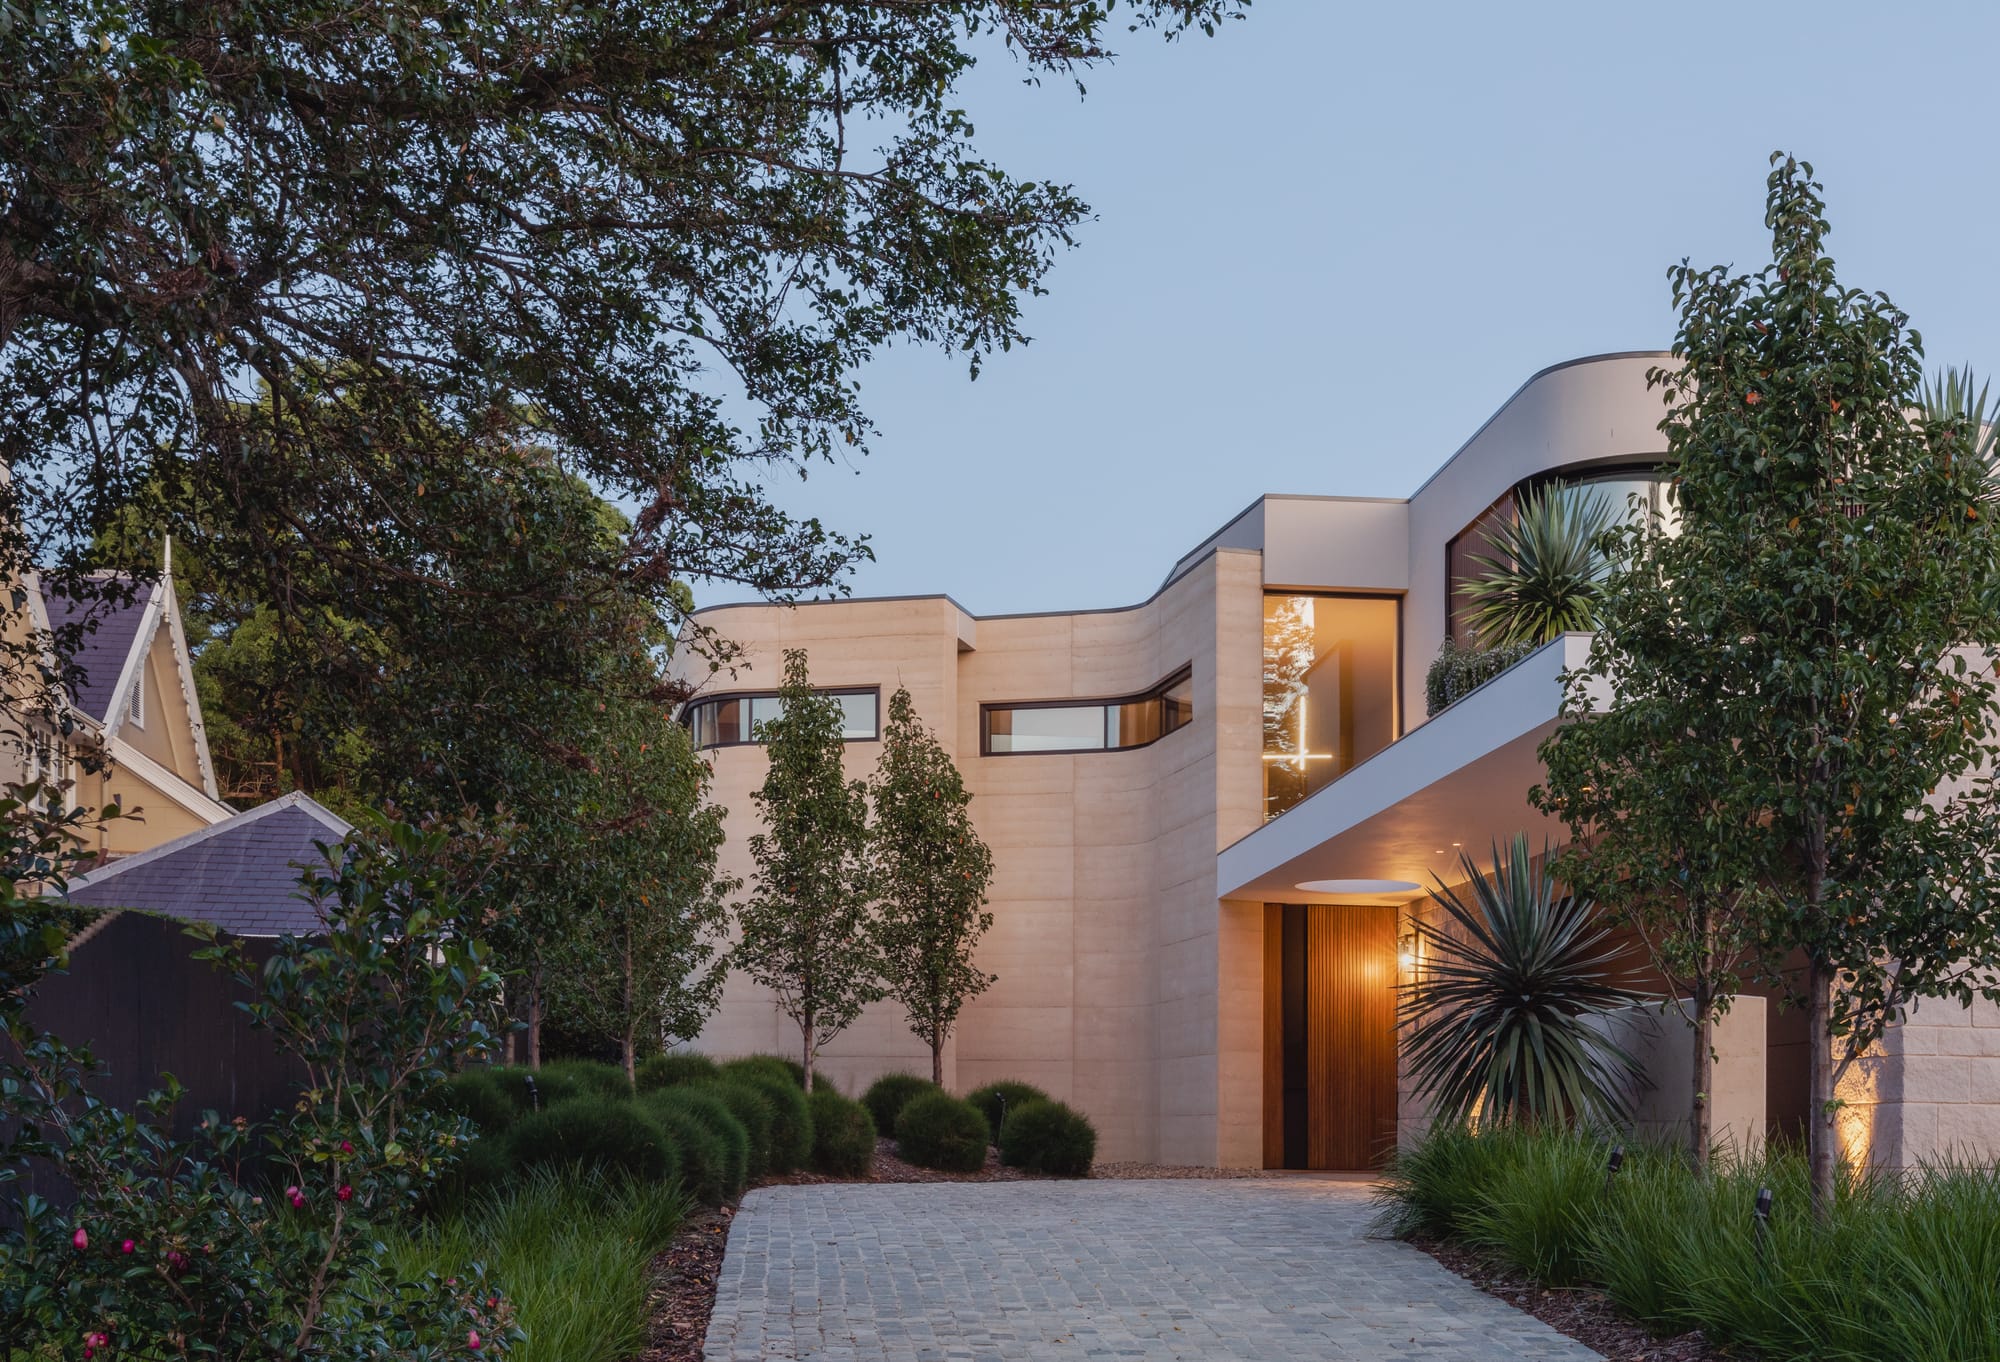 Kenneth Street by Design Studio Group showing the driveway and entry to the house